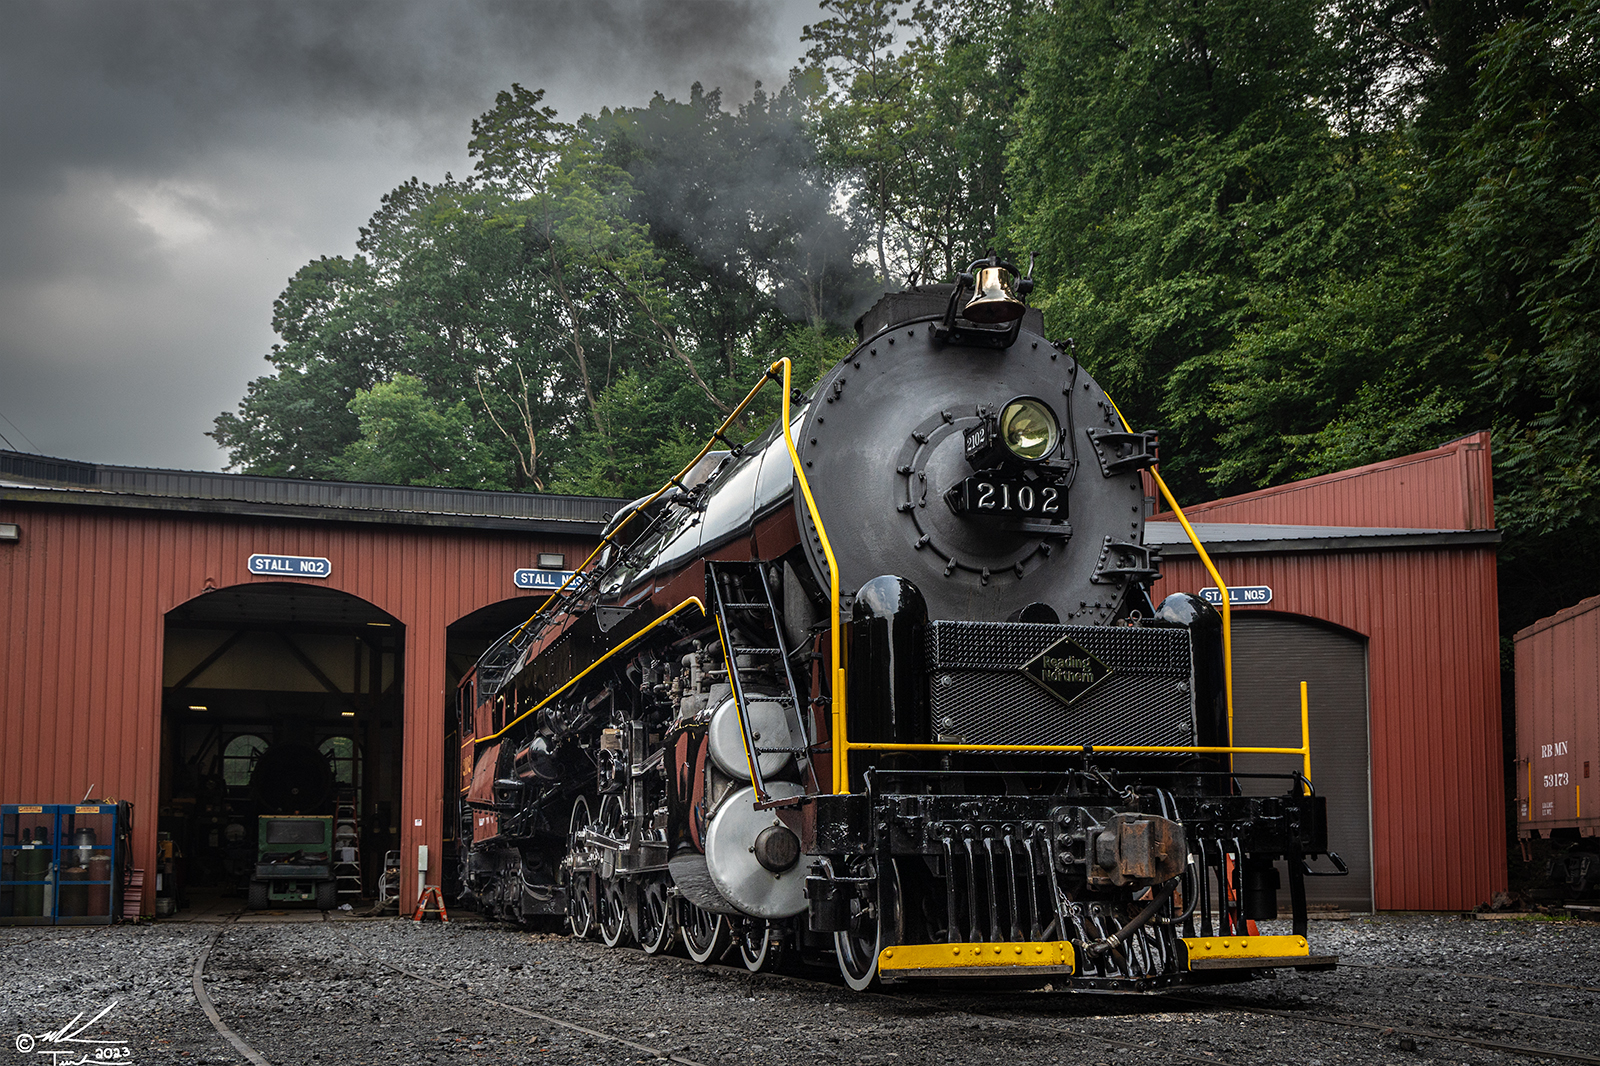 RDG 2102 is a class T-1 and  is pictured in Port Clinton, Pennsylvania, USA.  This was taken along the Reading & Northern Steam Shop on the Reading Company. Photo Copyright: Mark Turkovich uploaded to Railroad Gallery on 07/01/2023. This photograph of RDG 2102 was taken on Friday, June 30, 2023. All Rights Reserved. 